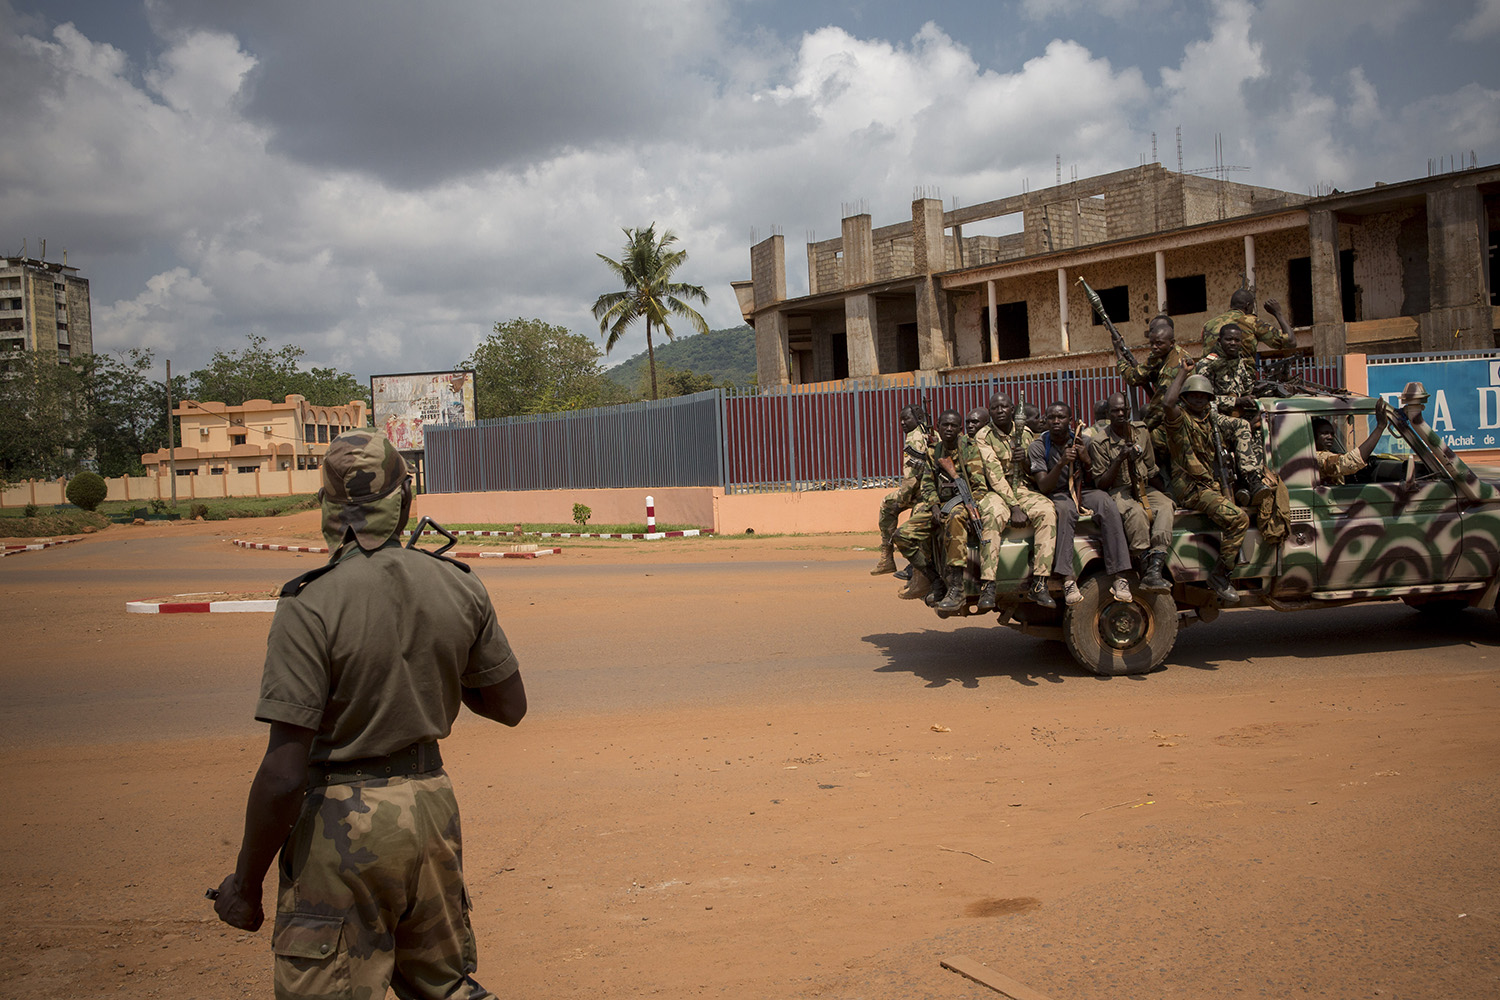 Seleka fighters in the street of Bangui, while fighting continue between Antibalaka and seleka members. The Antibalaka launched an attack on Bangui on several districts.